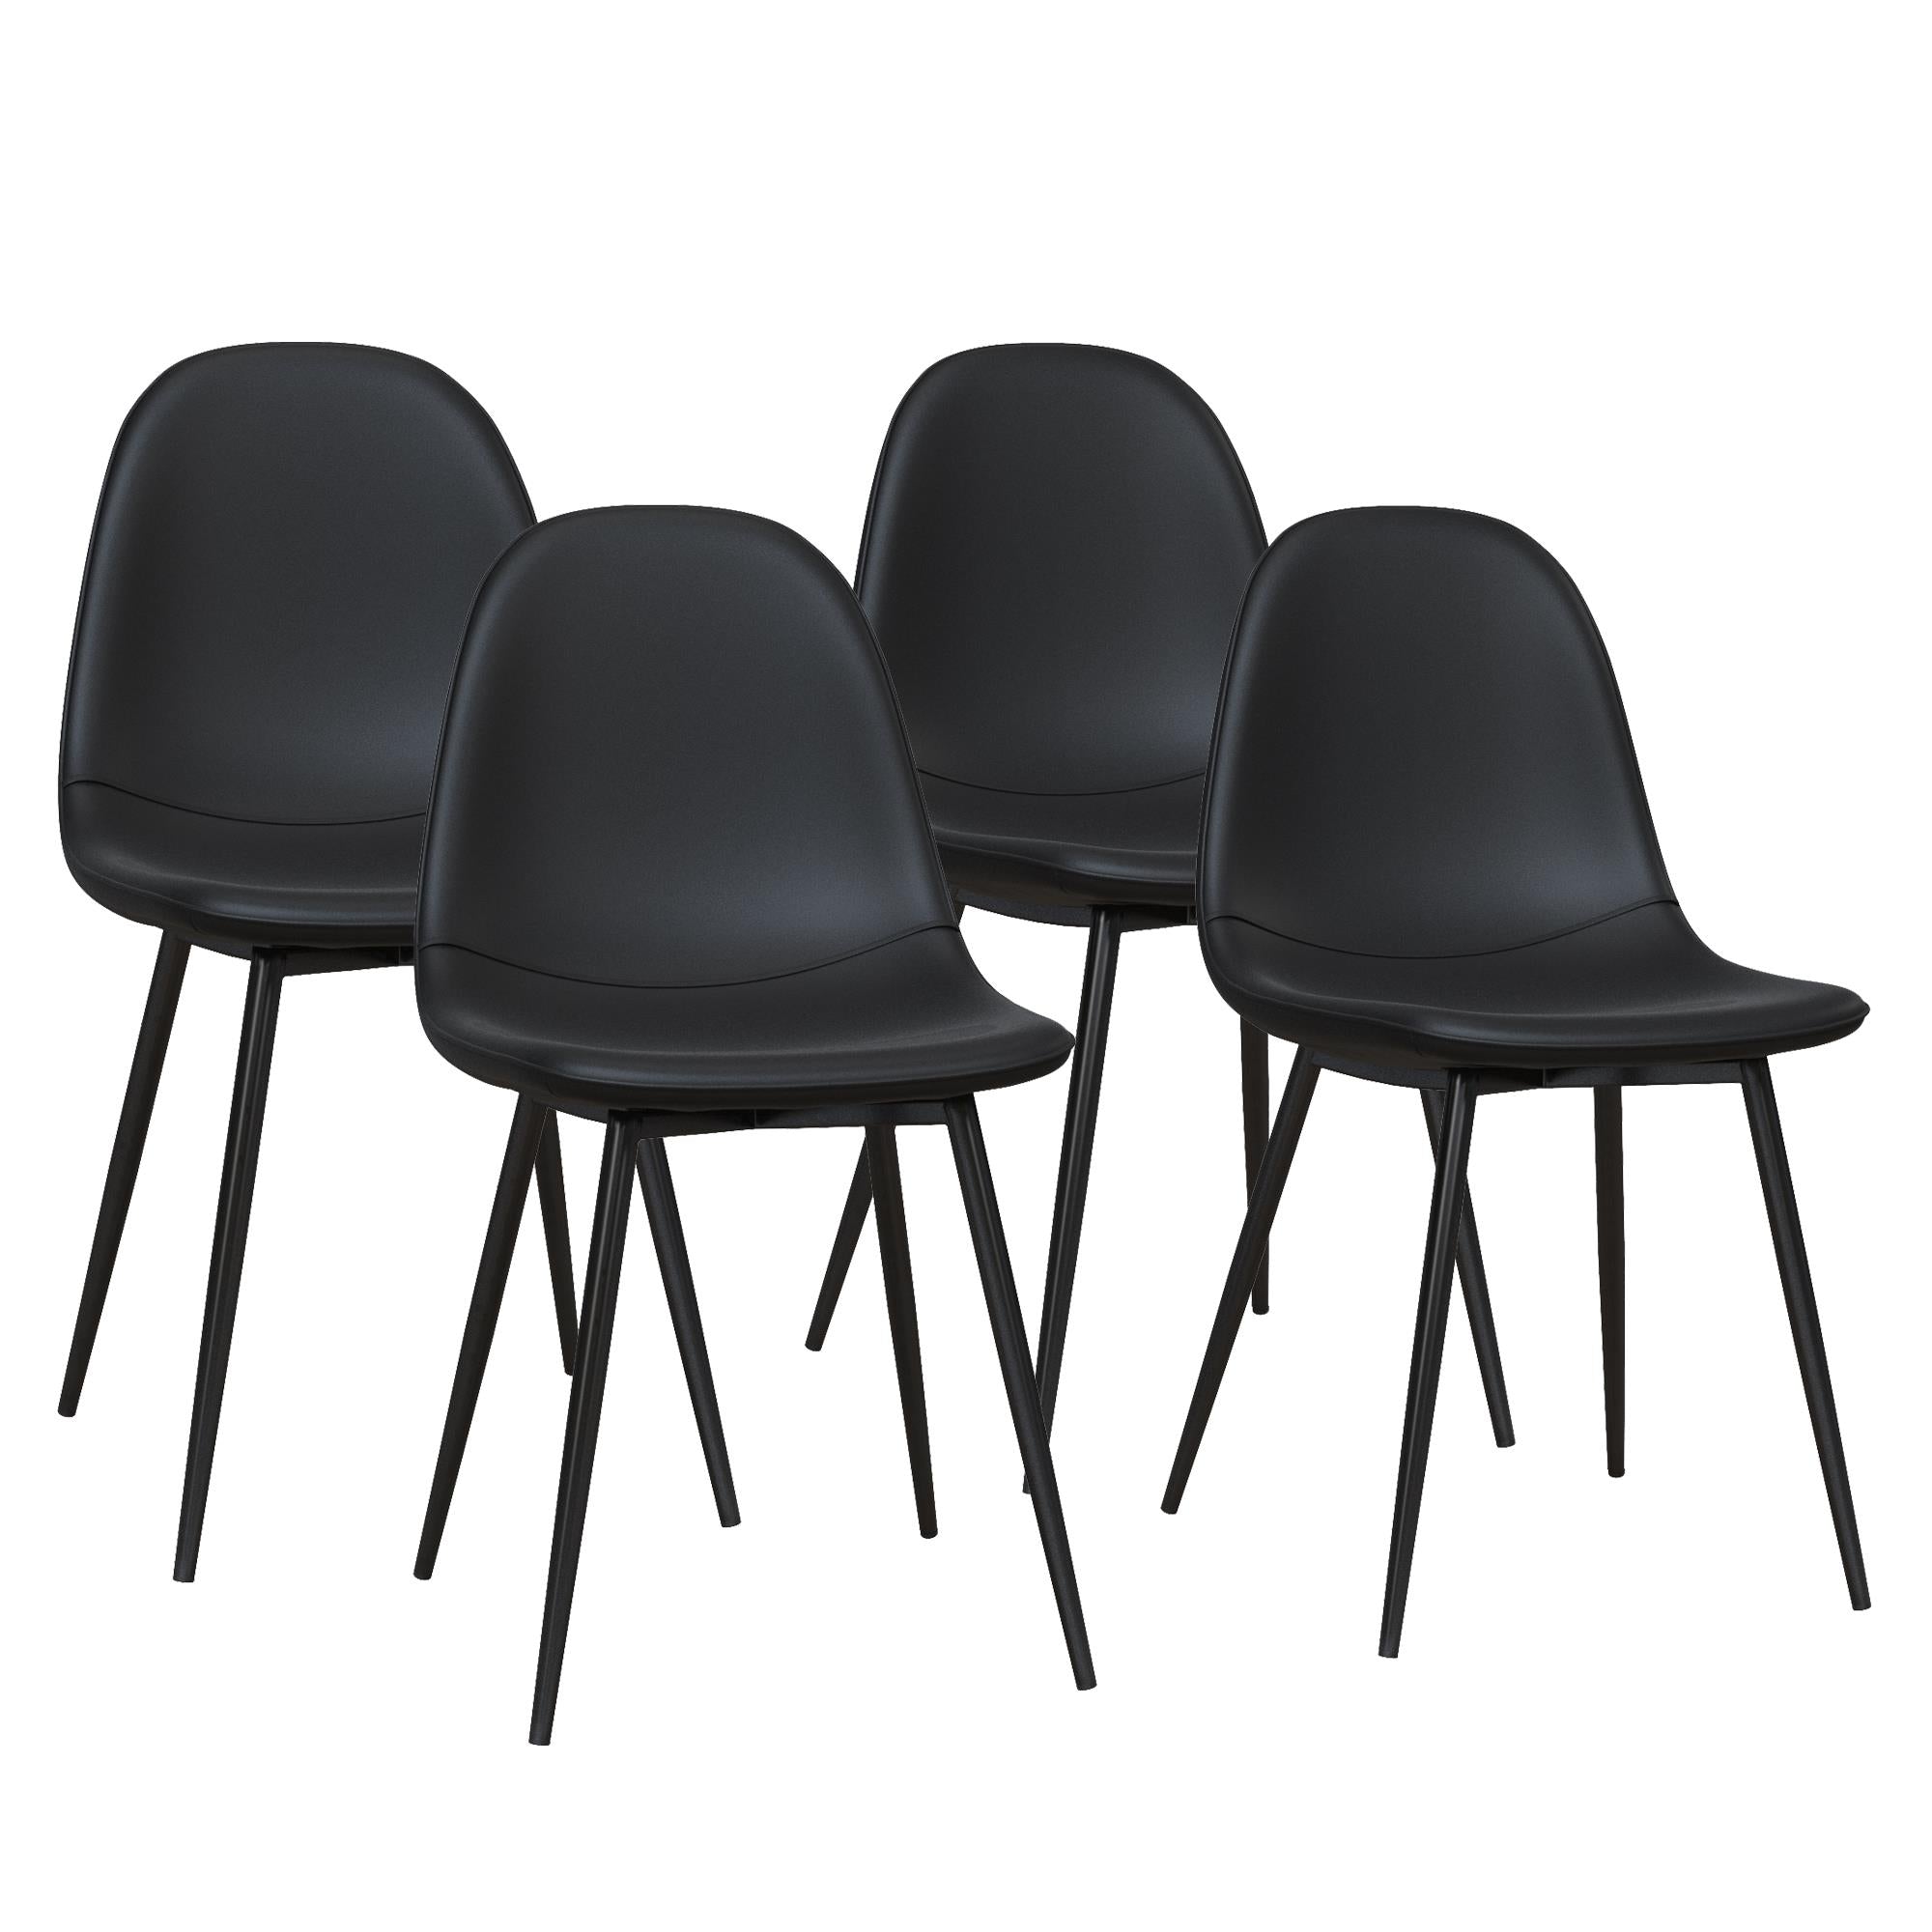 Set of 4 - Cooper Faux Leather Dining Chairs, Black (#K2511)